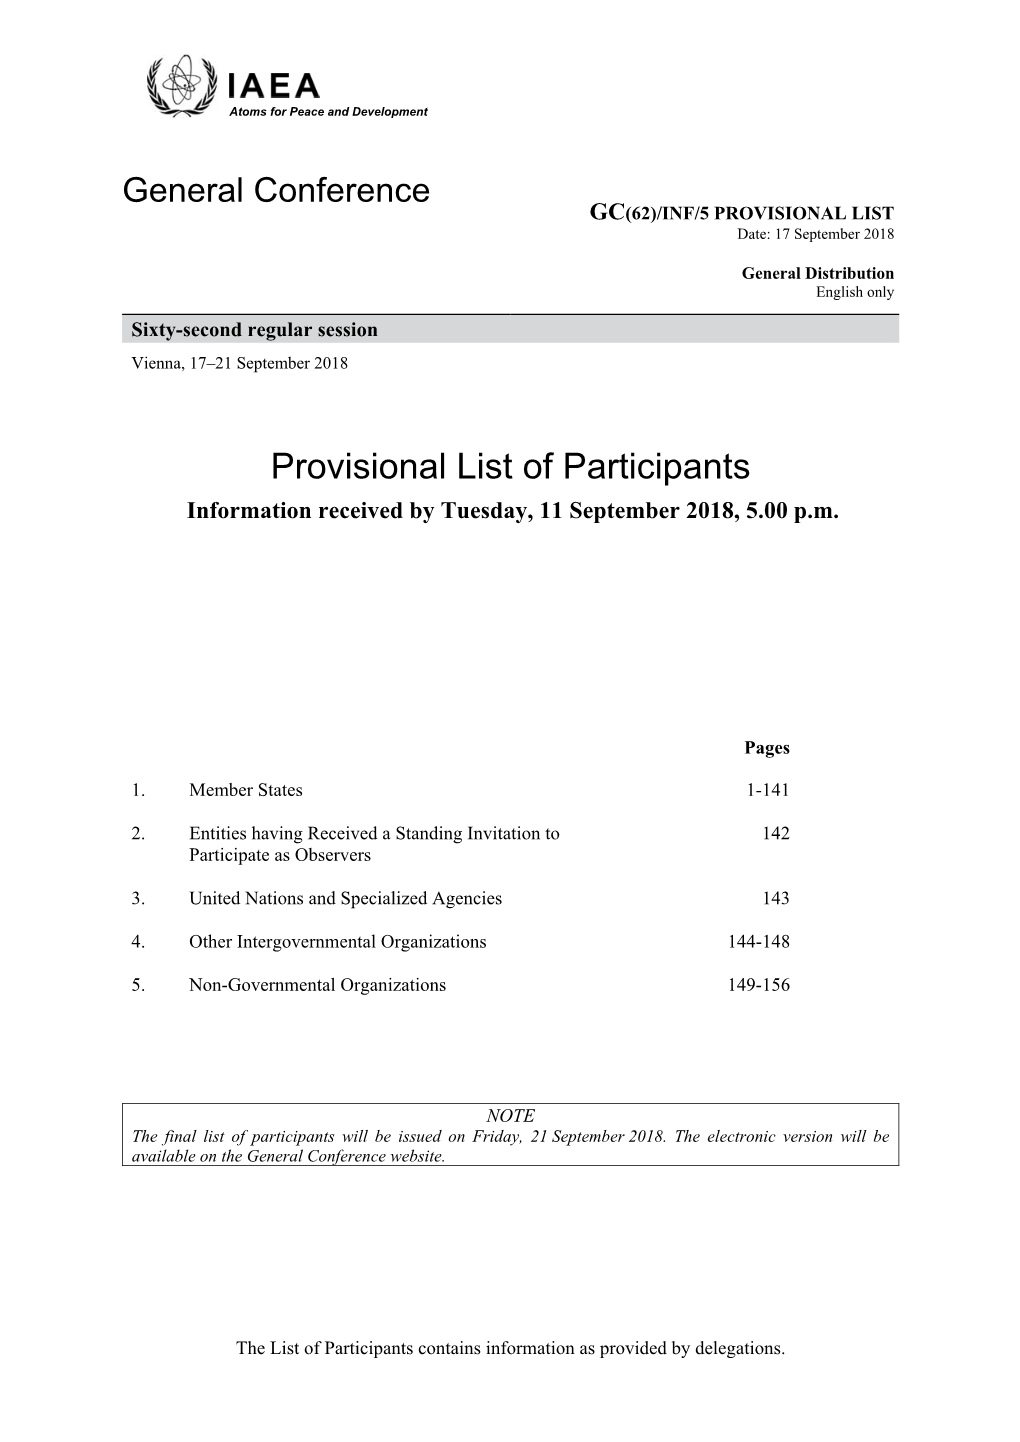 Provisional List of Participants Information Received by Tuesday, 11 September 2018, 5.00 P.M